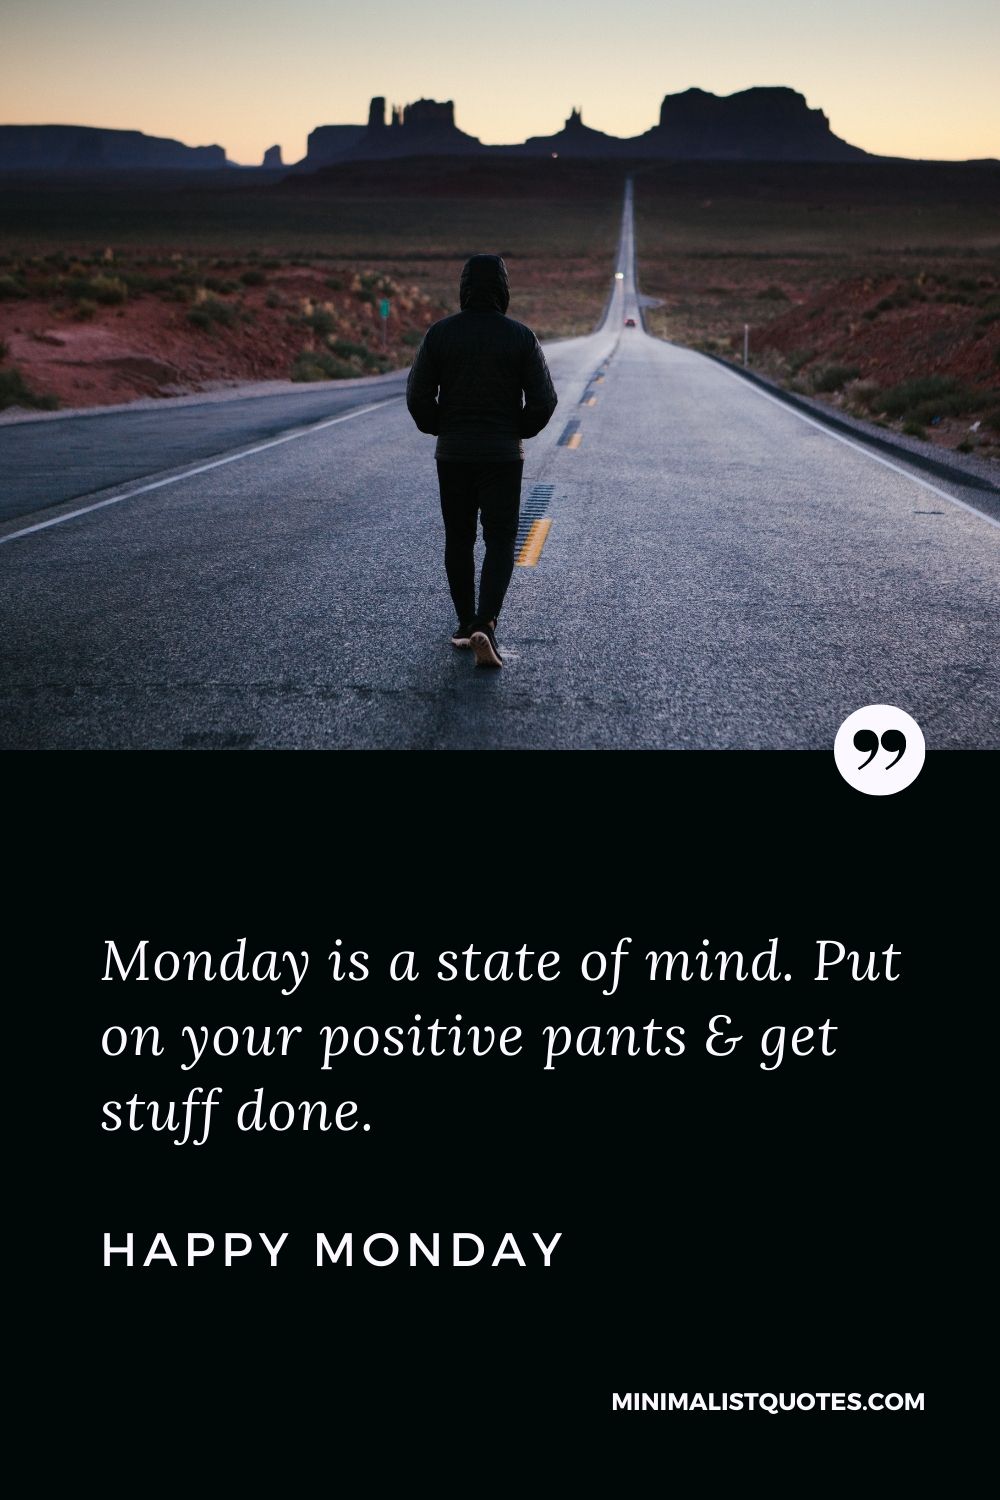 Monday Motivation Quote & message: Monday is a state of mind. Put on your positive pants & get stuff done. Happy Monday!